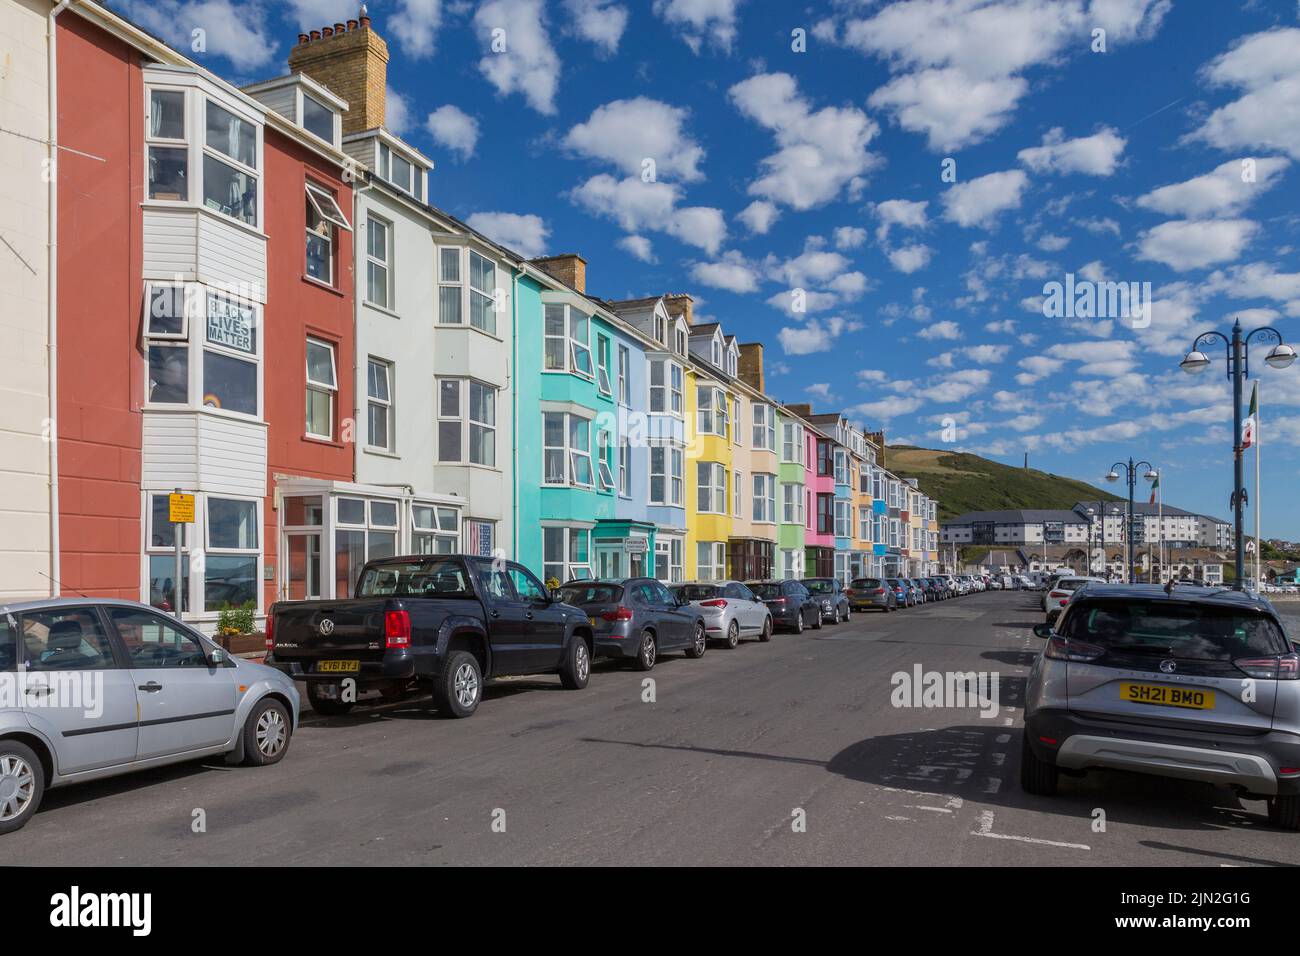 A row of colourful house line a street in the seaside town of Aberystwyth, Wales, United Kingdom. Stock Photo